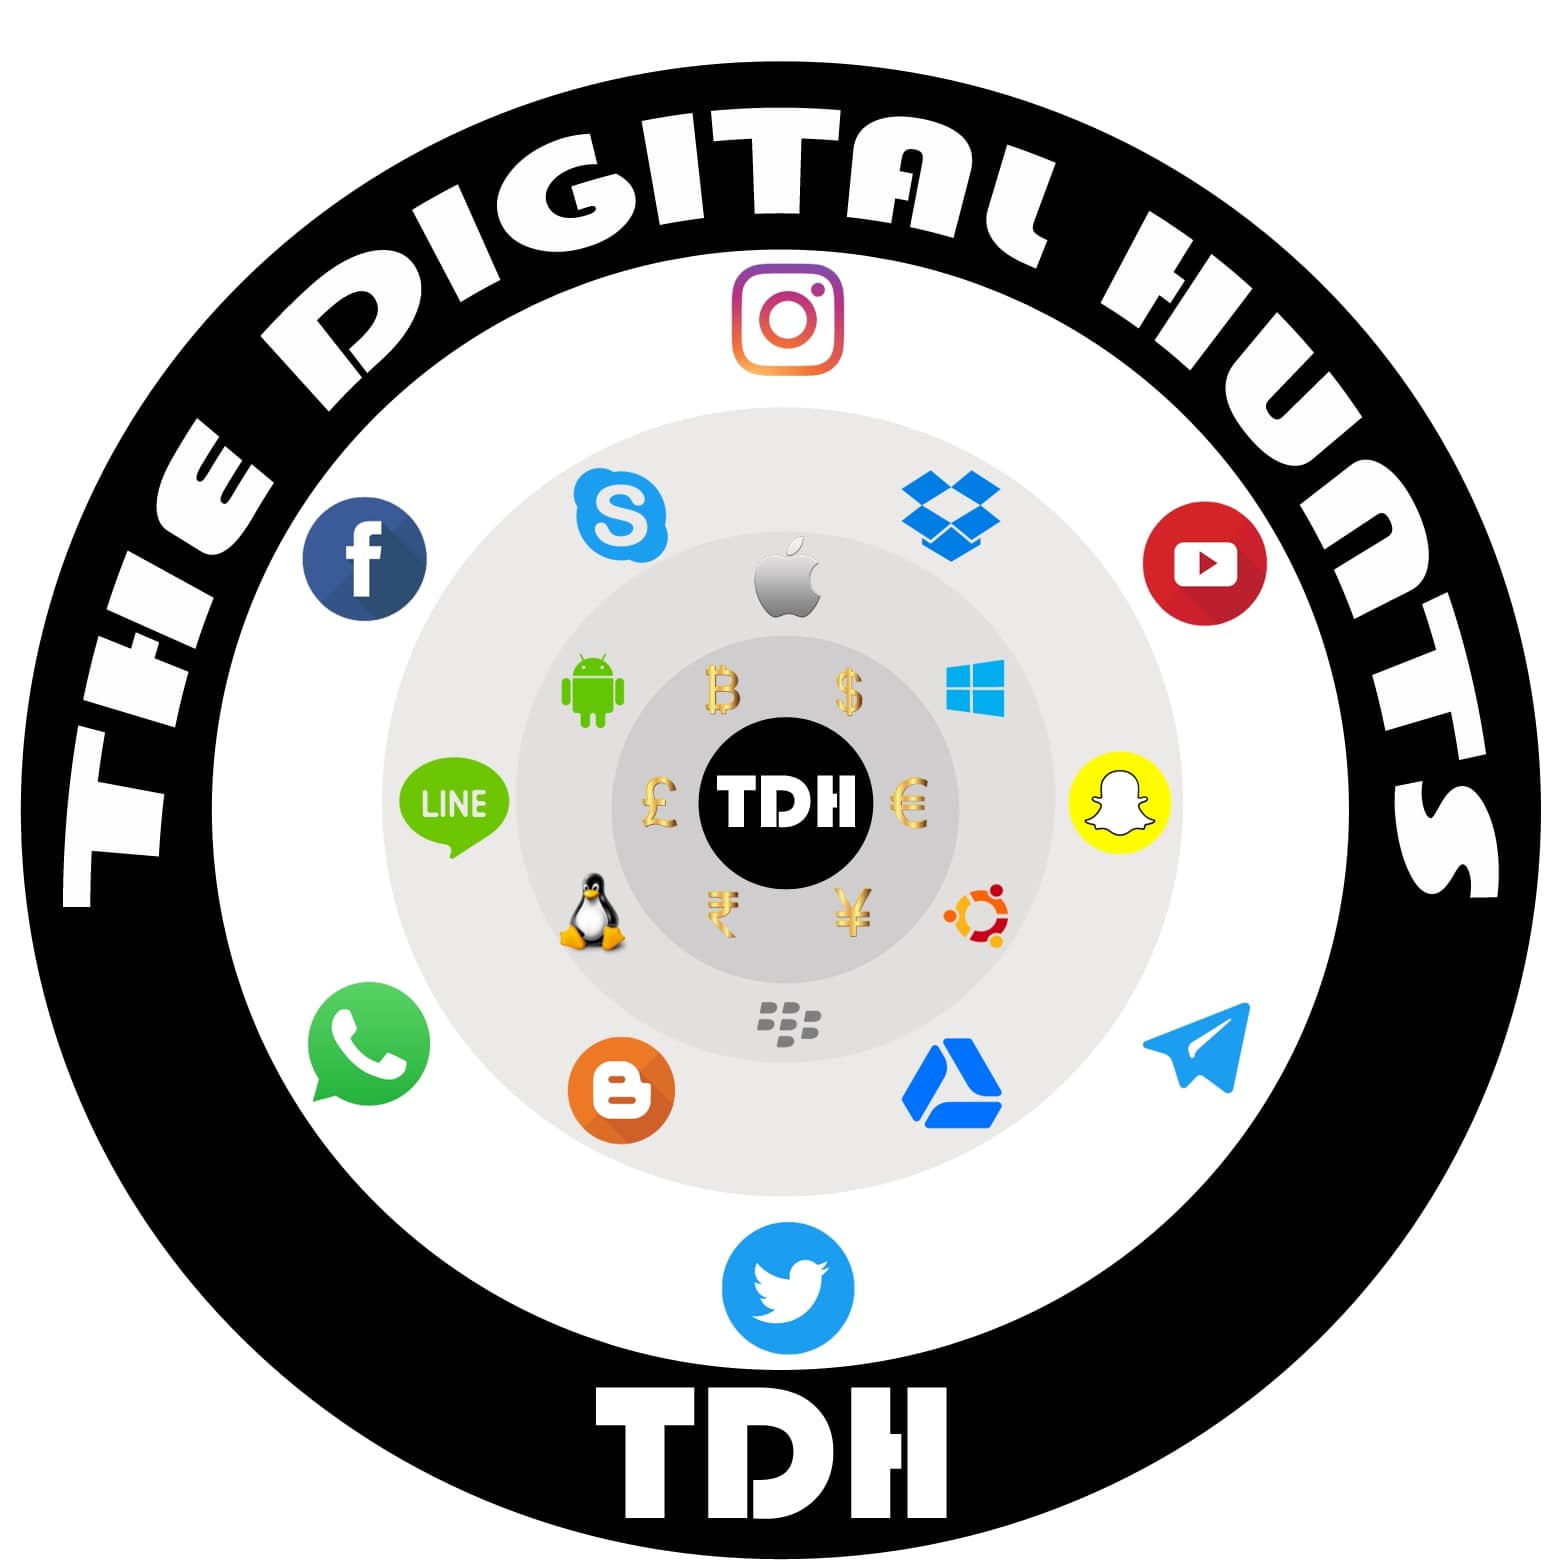  Digital Hunts, Get the Latest News, Reviews, and Tips